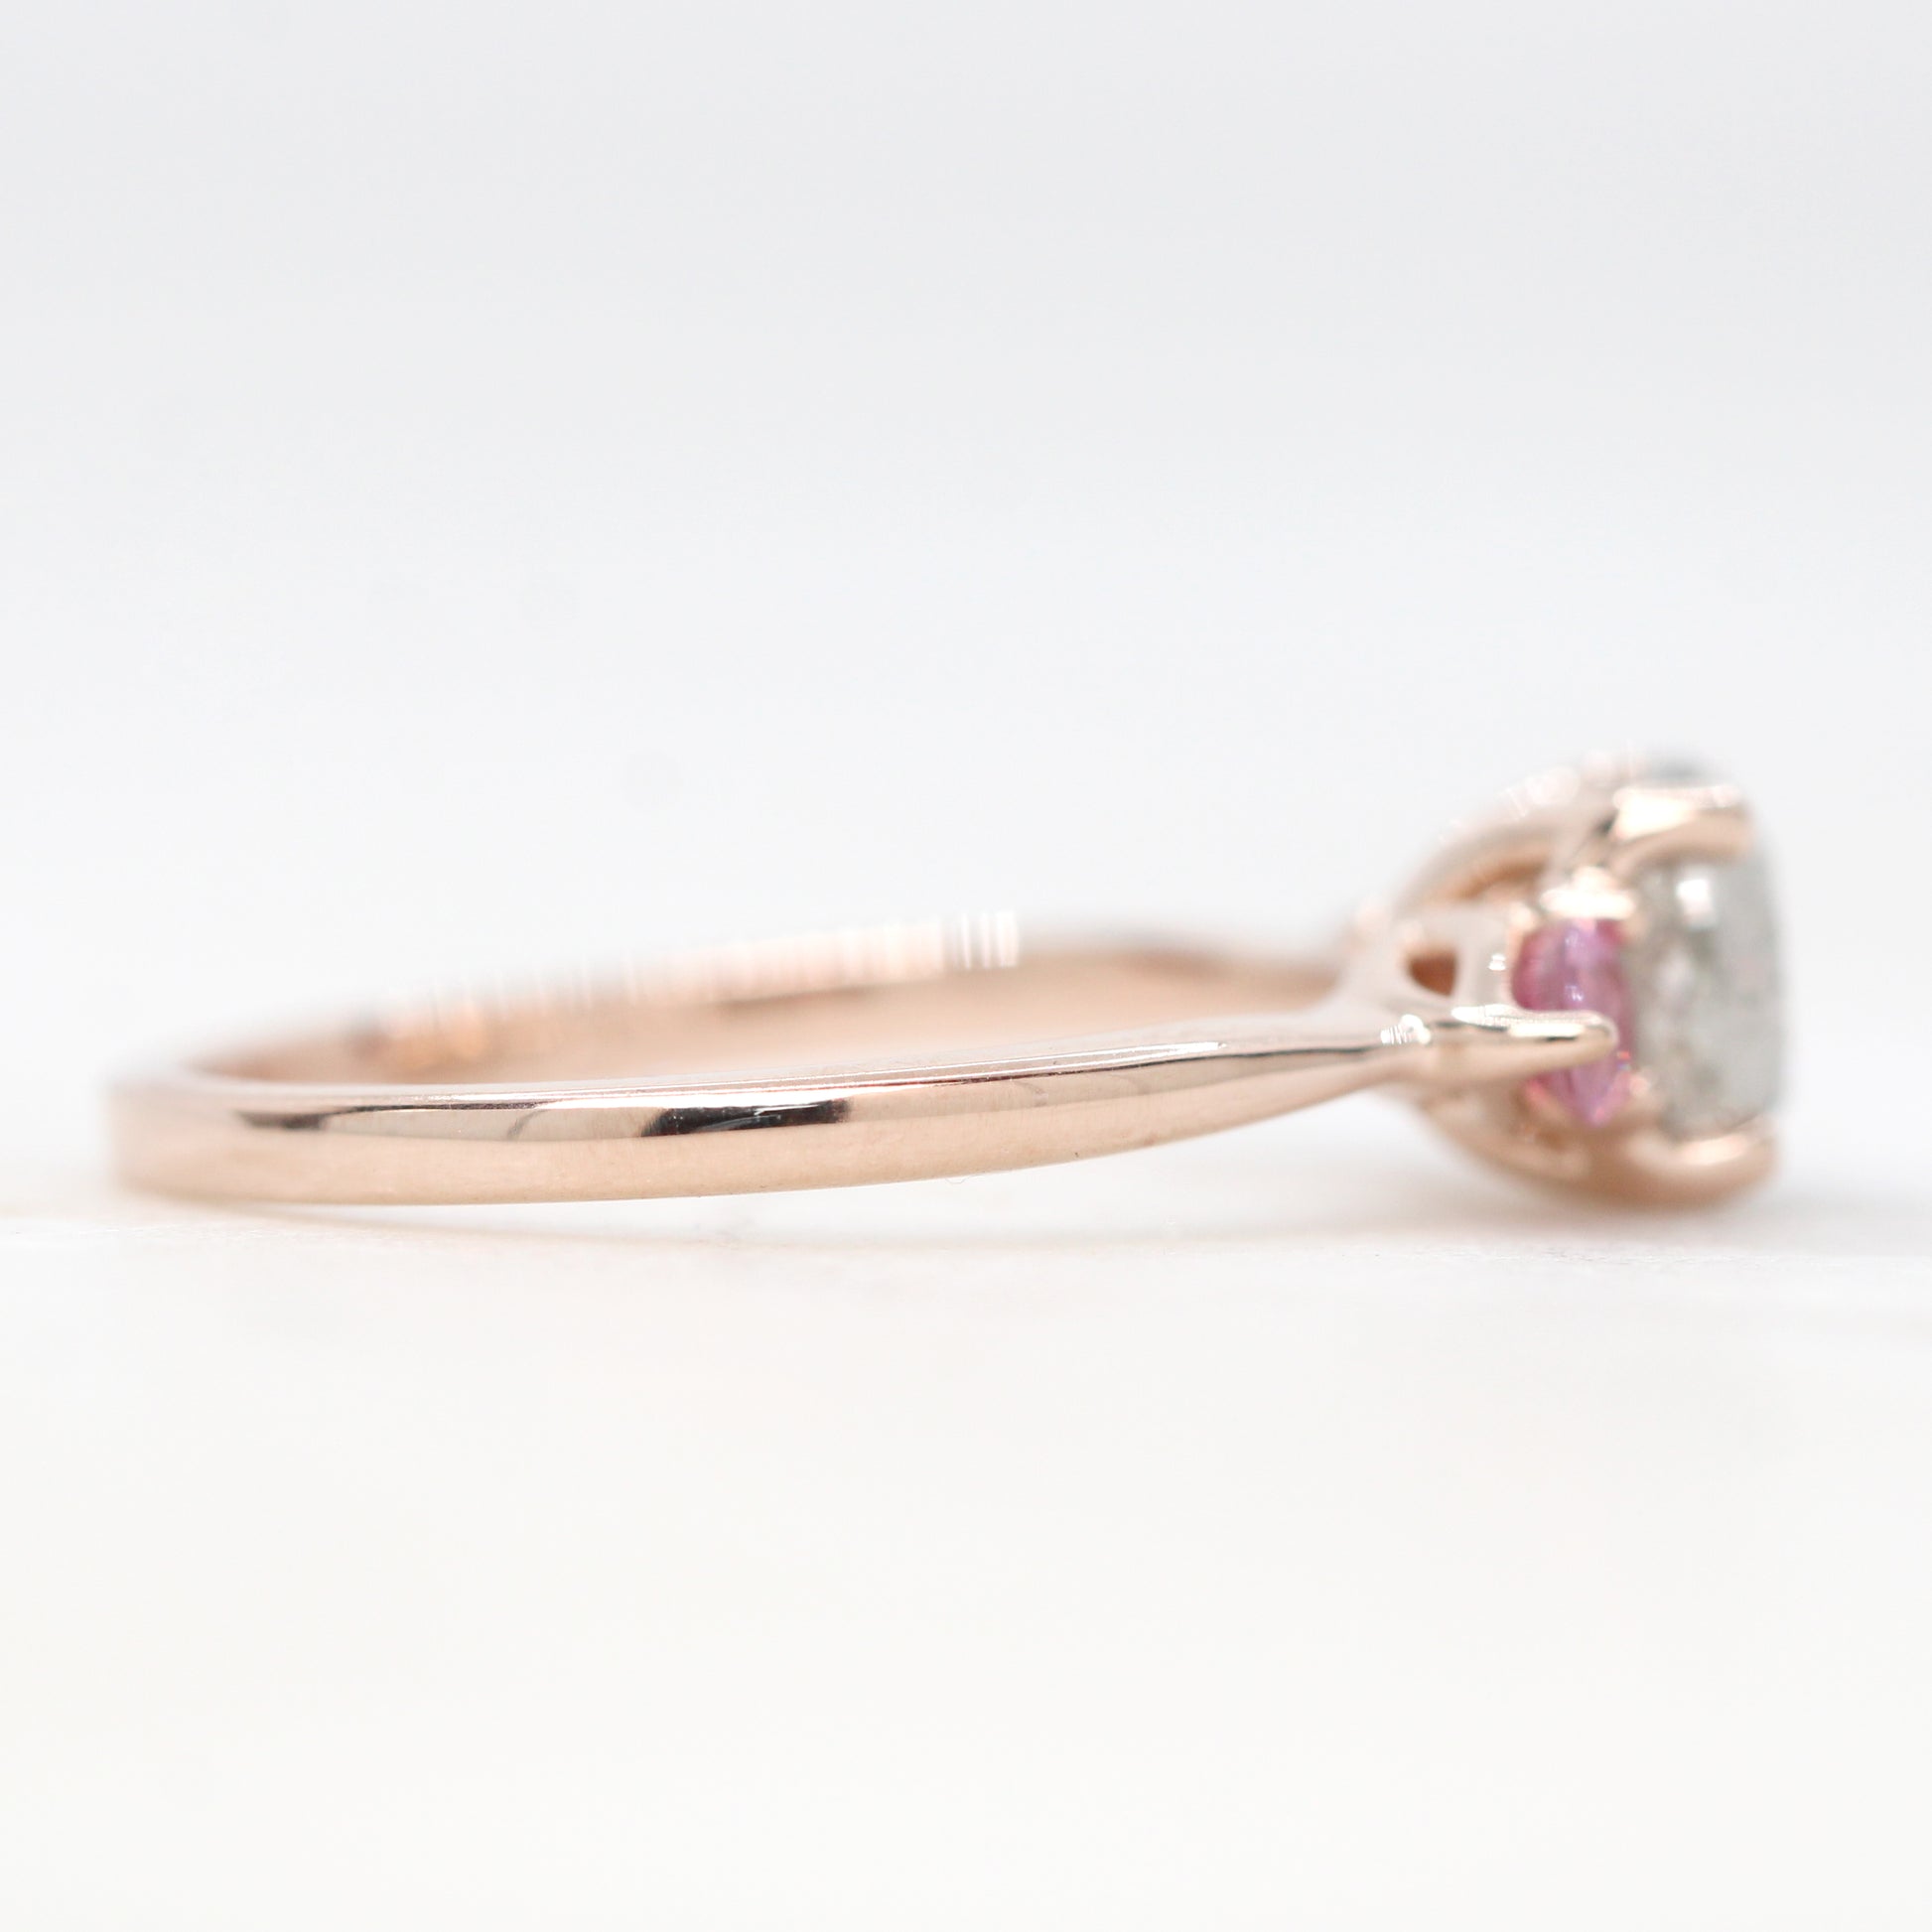 Oleander Ring with a 1.17 Carat Round Light Gray Celestial Diamond and Pink Sapphire Accents in 14k Rose Gold - Ready to Size and Ship - Midwinter Co. Alternative Bridal Rings and Modern Fine Jewelry